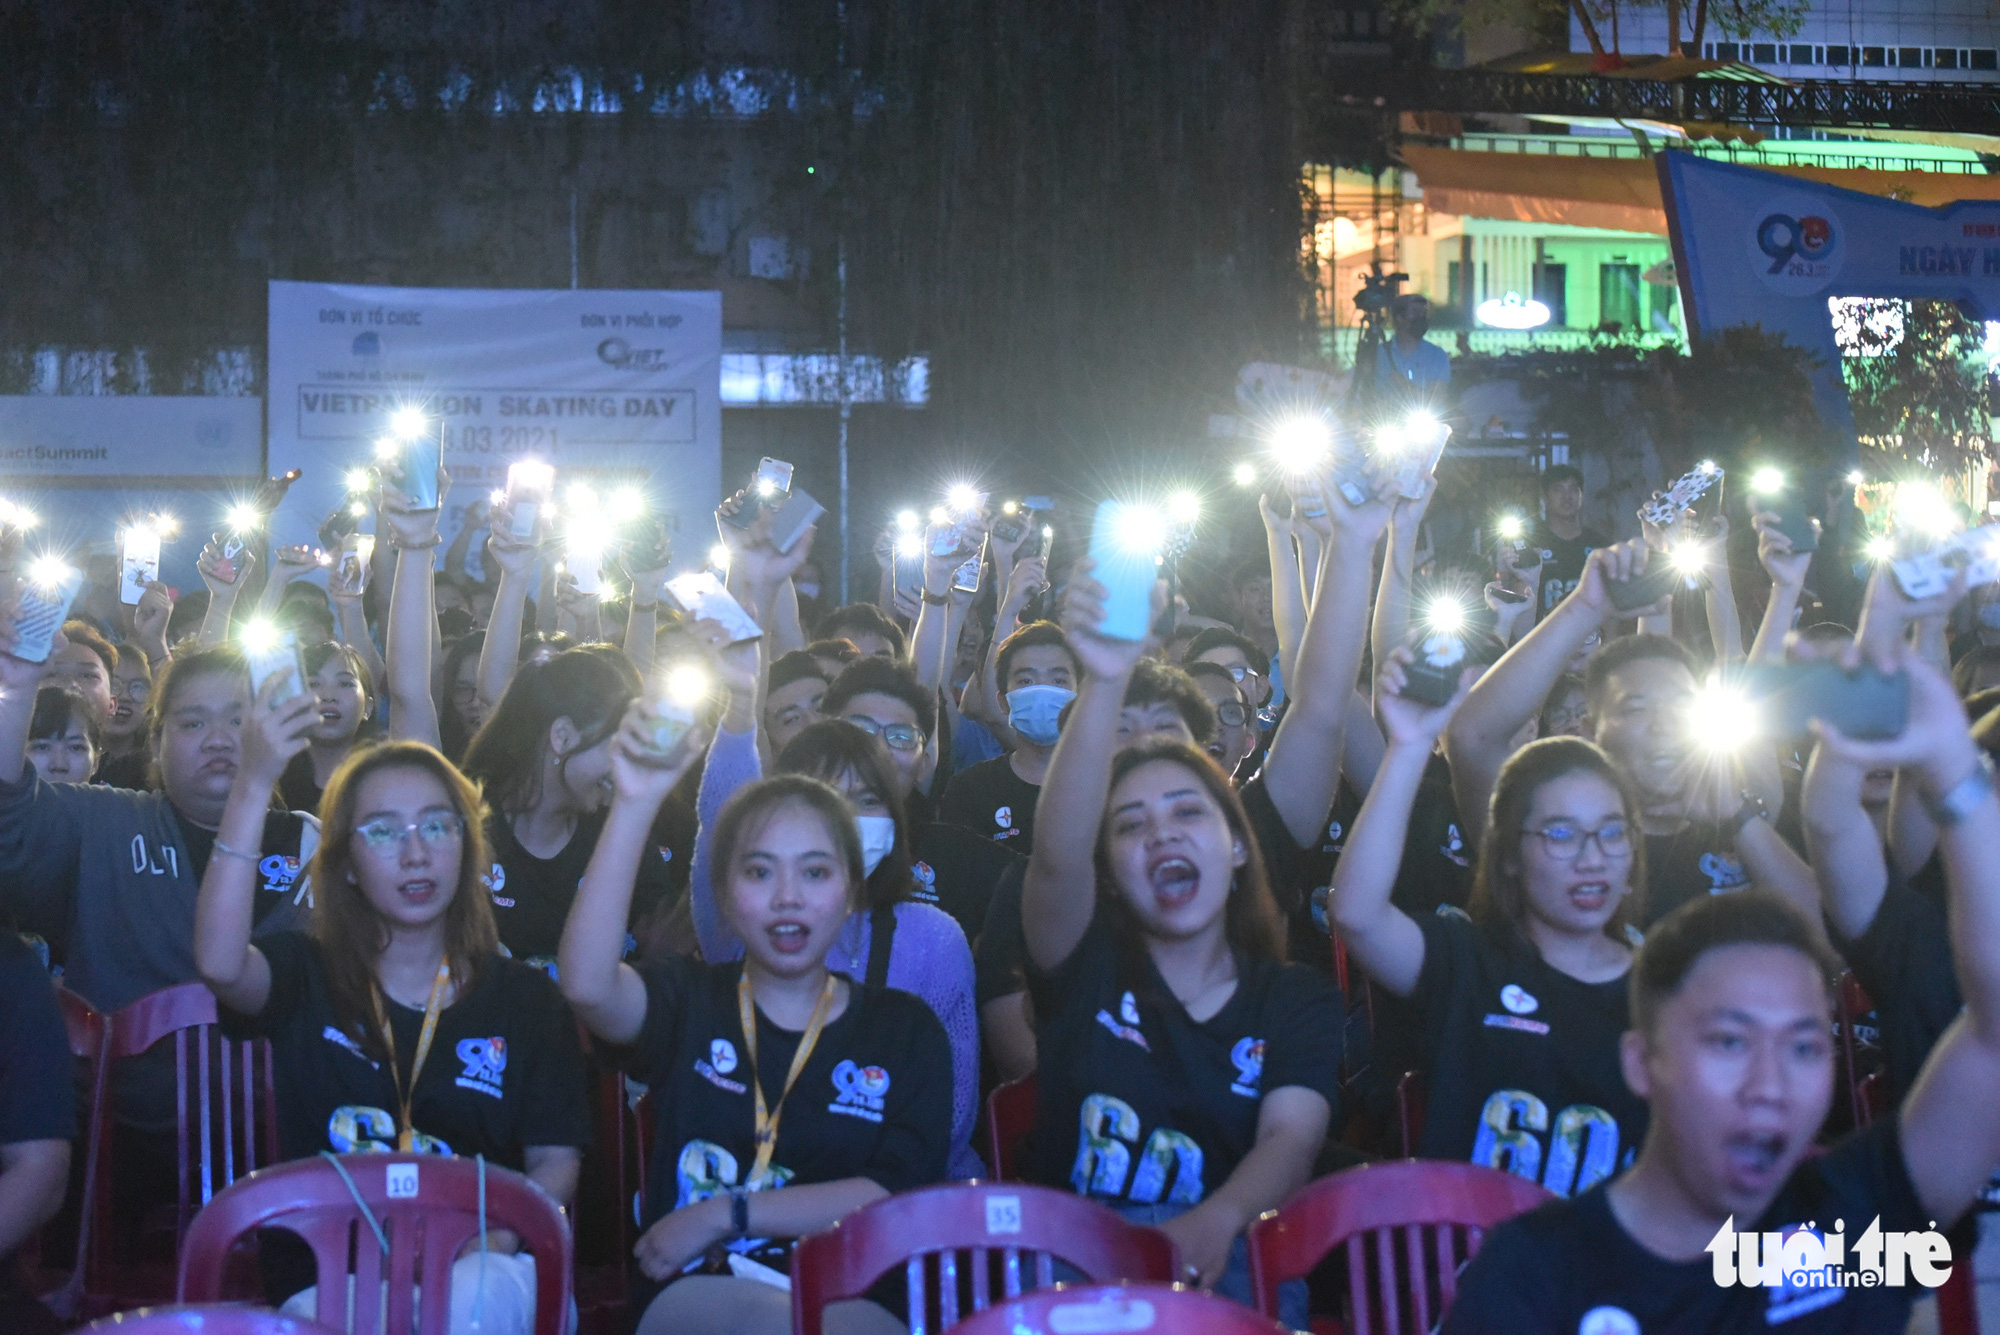 Young people turn on their smartphone flashlights to during a performance at the Youth Culture House in District 1, Ho Chi Minh City, March 27, 2021. Photo: Ngoc Phuong / Tuoi Tre